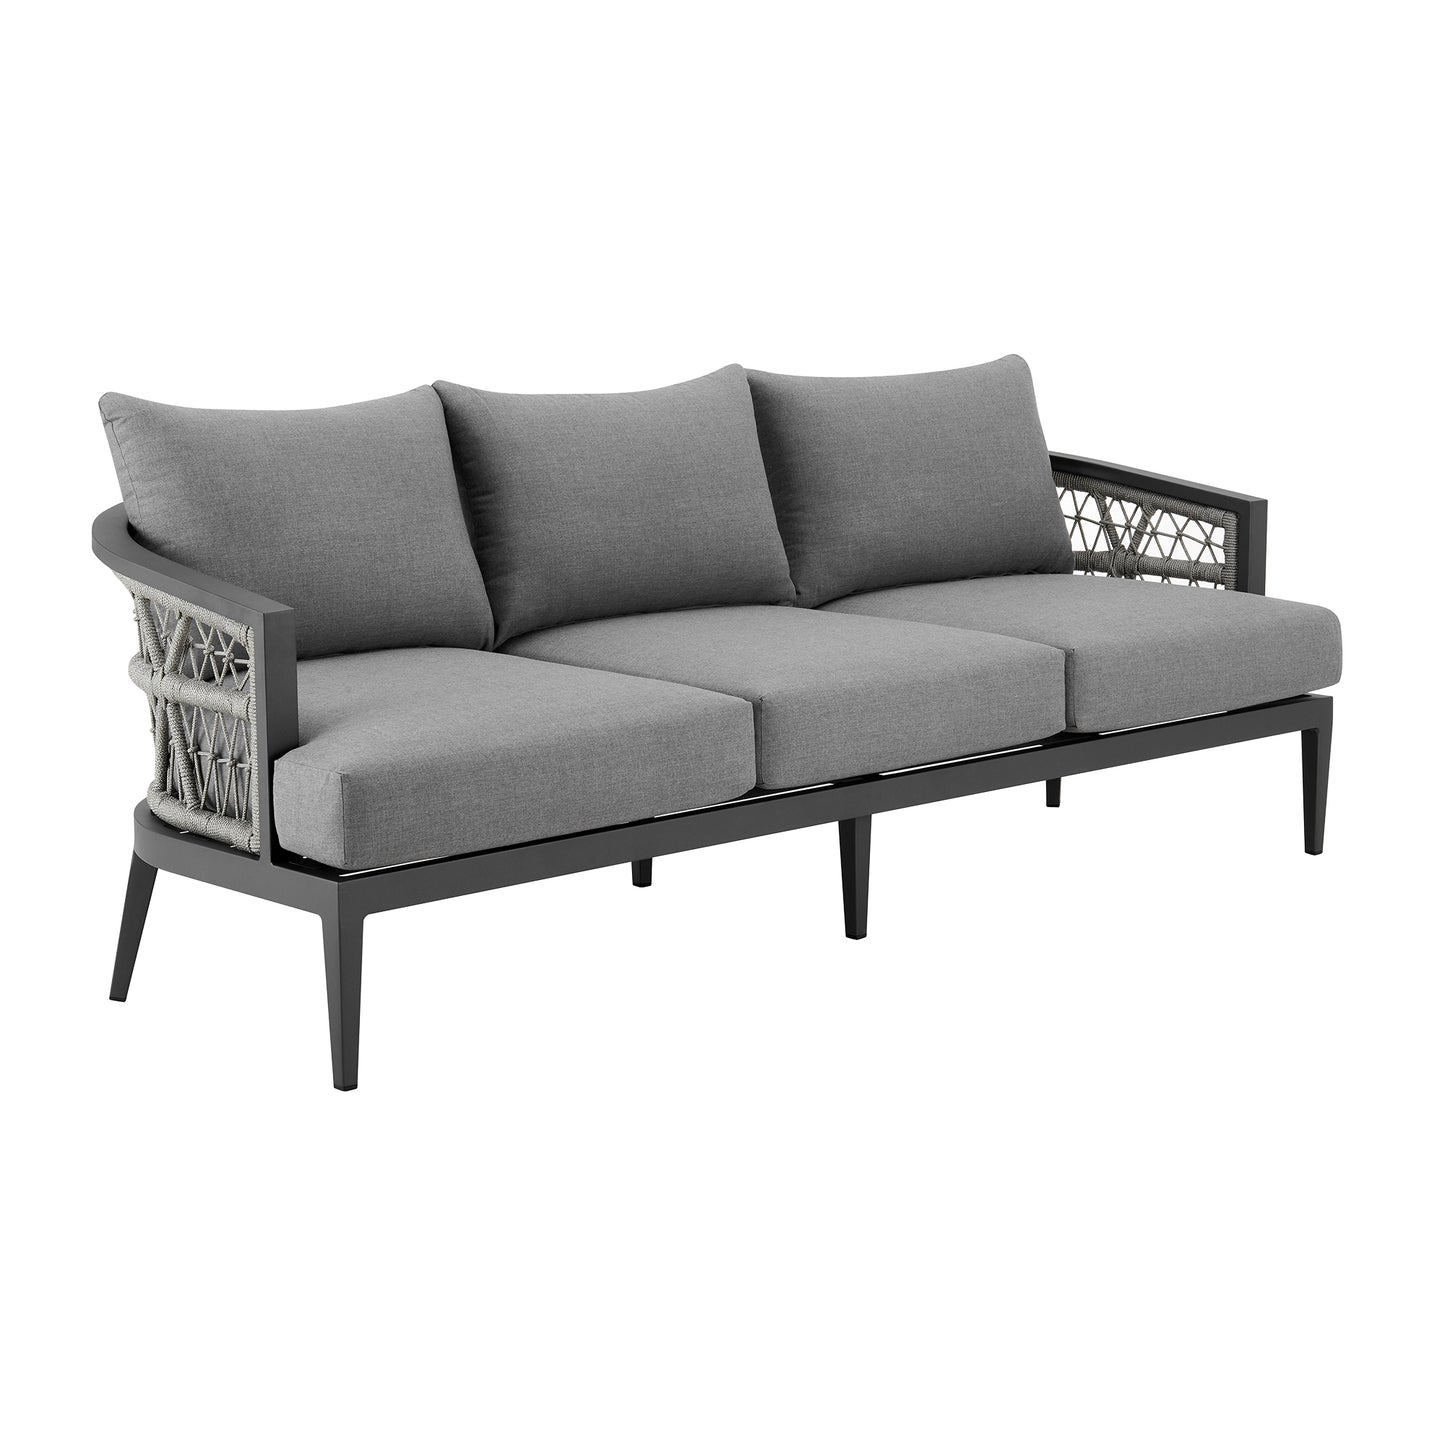 Zella Outdoor Patio Sofa in Aluminum with Light Gray Rope and Earl Gray Cushions